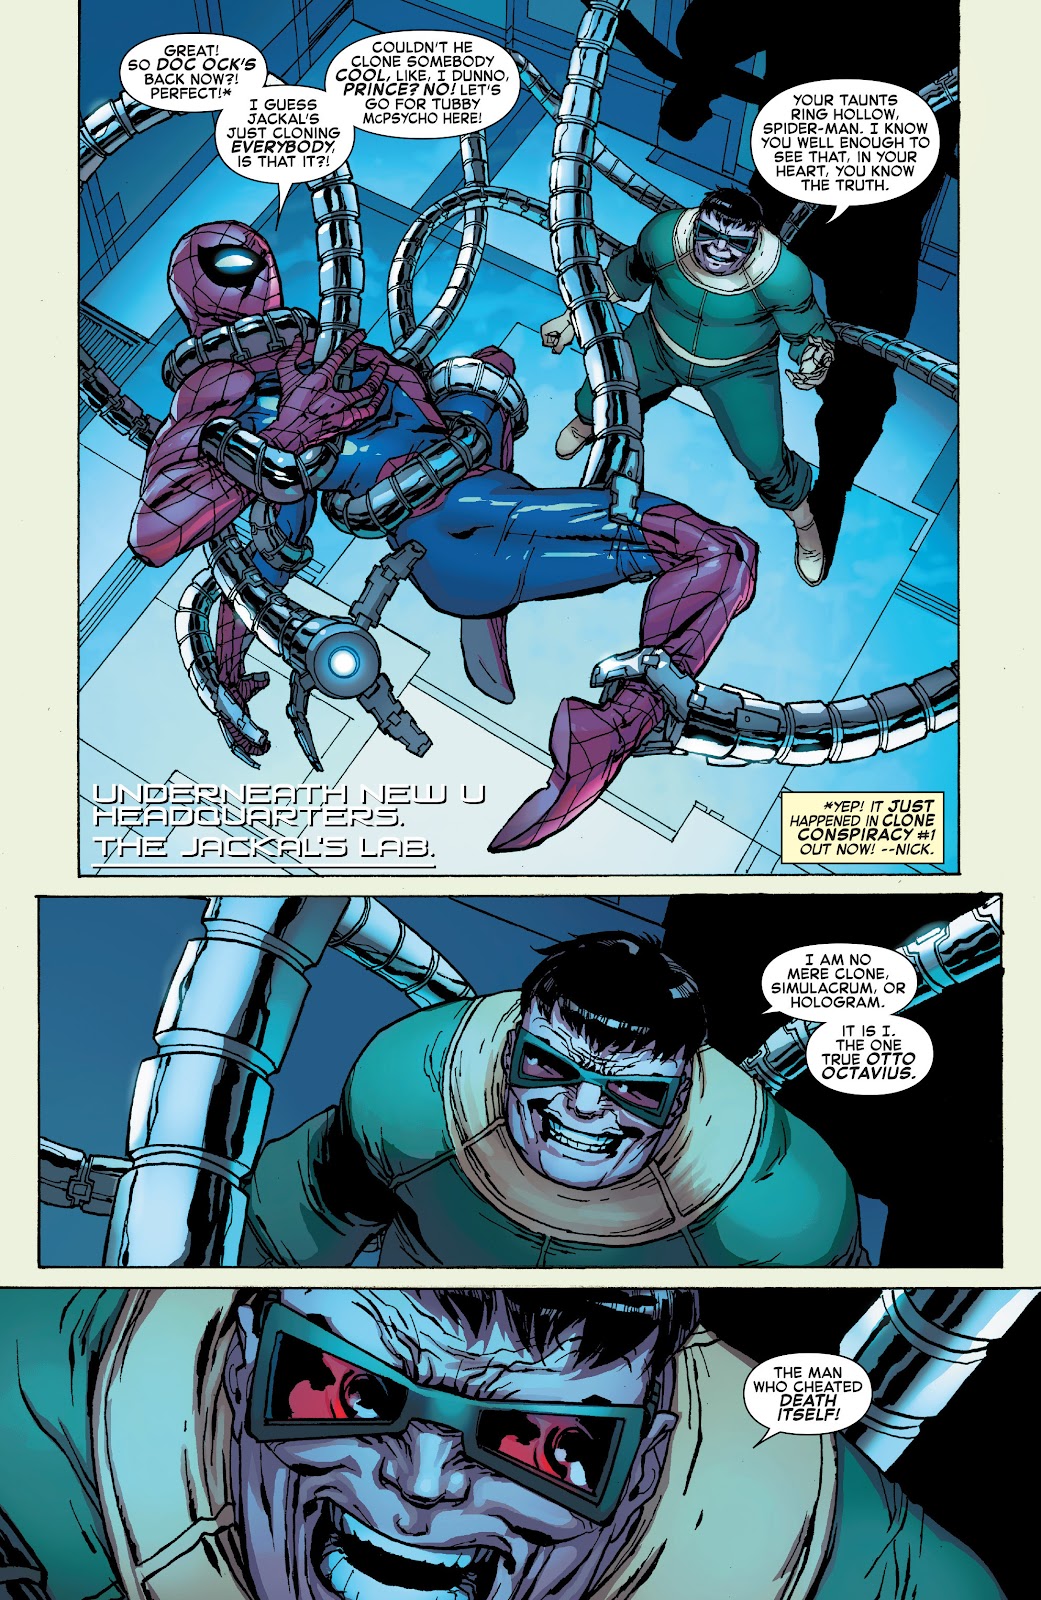 The Amazing Spider-Man (2015) 20 Page 2.